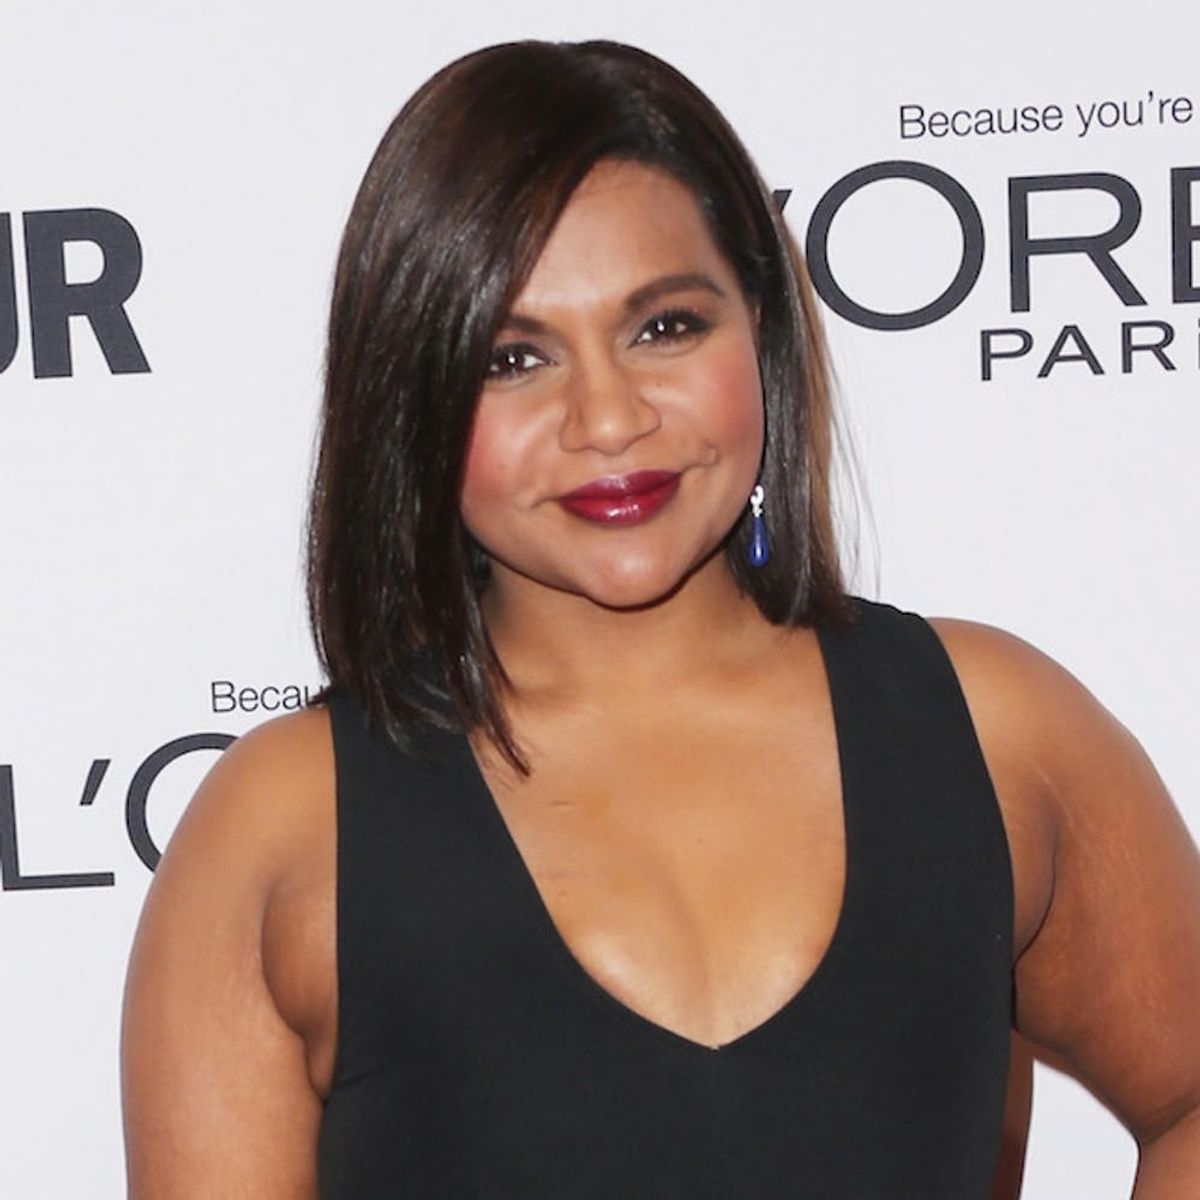 50 Times Mindy Kaling’s Instagram Made Your Bad Day All Better